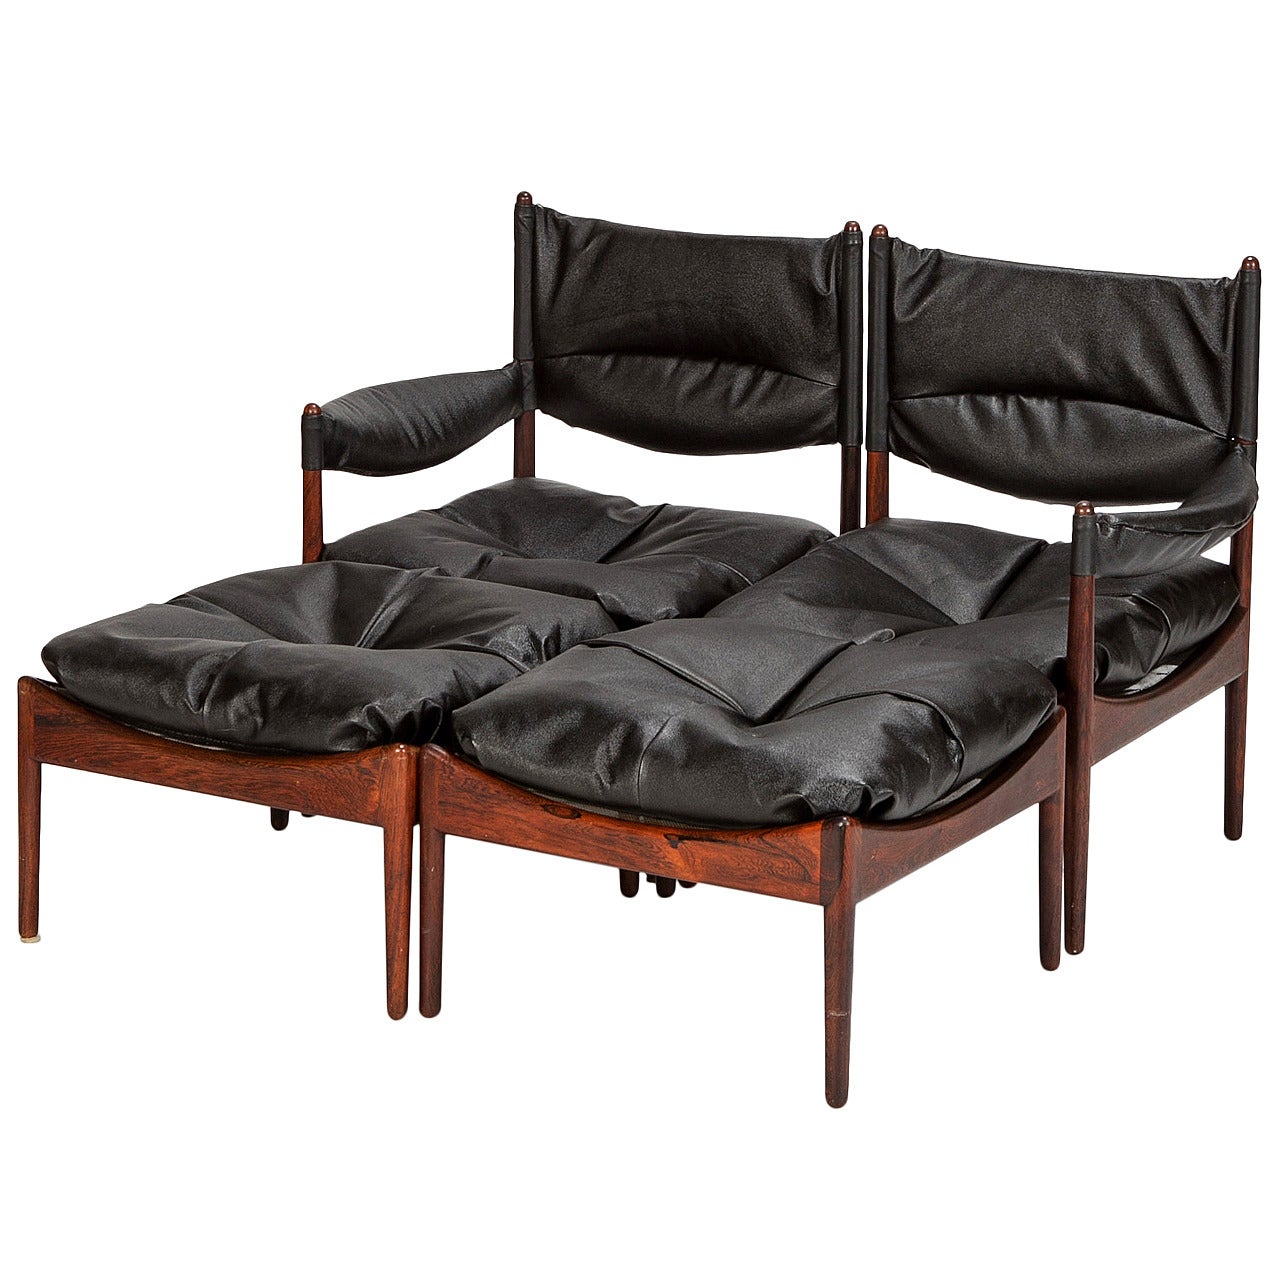 Danish Rosewood Modus Lounge Chair Set by Kristian Solmer Vedel, 1960s